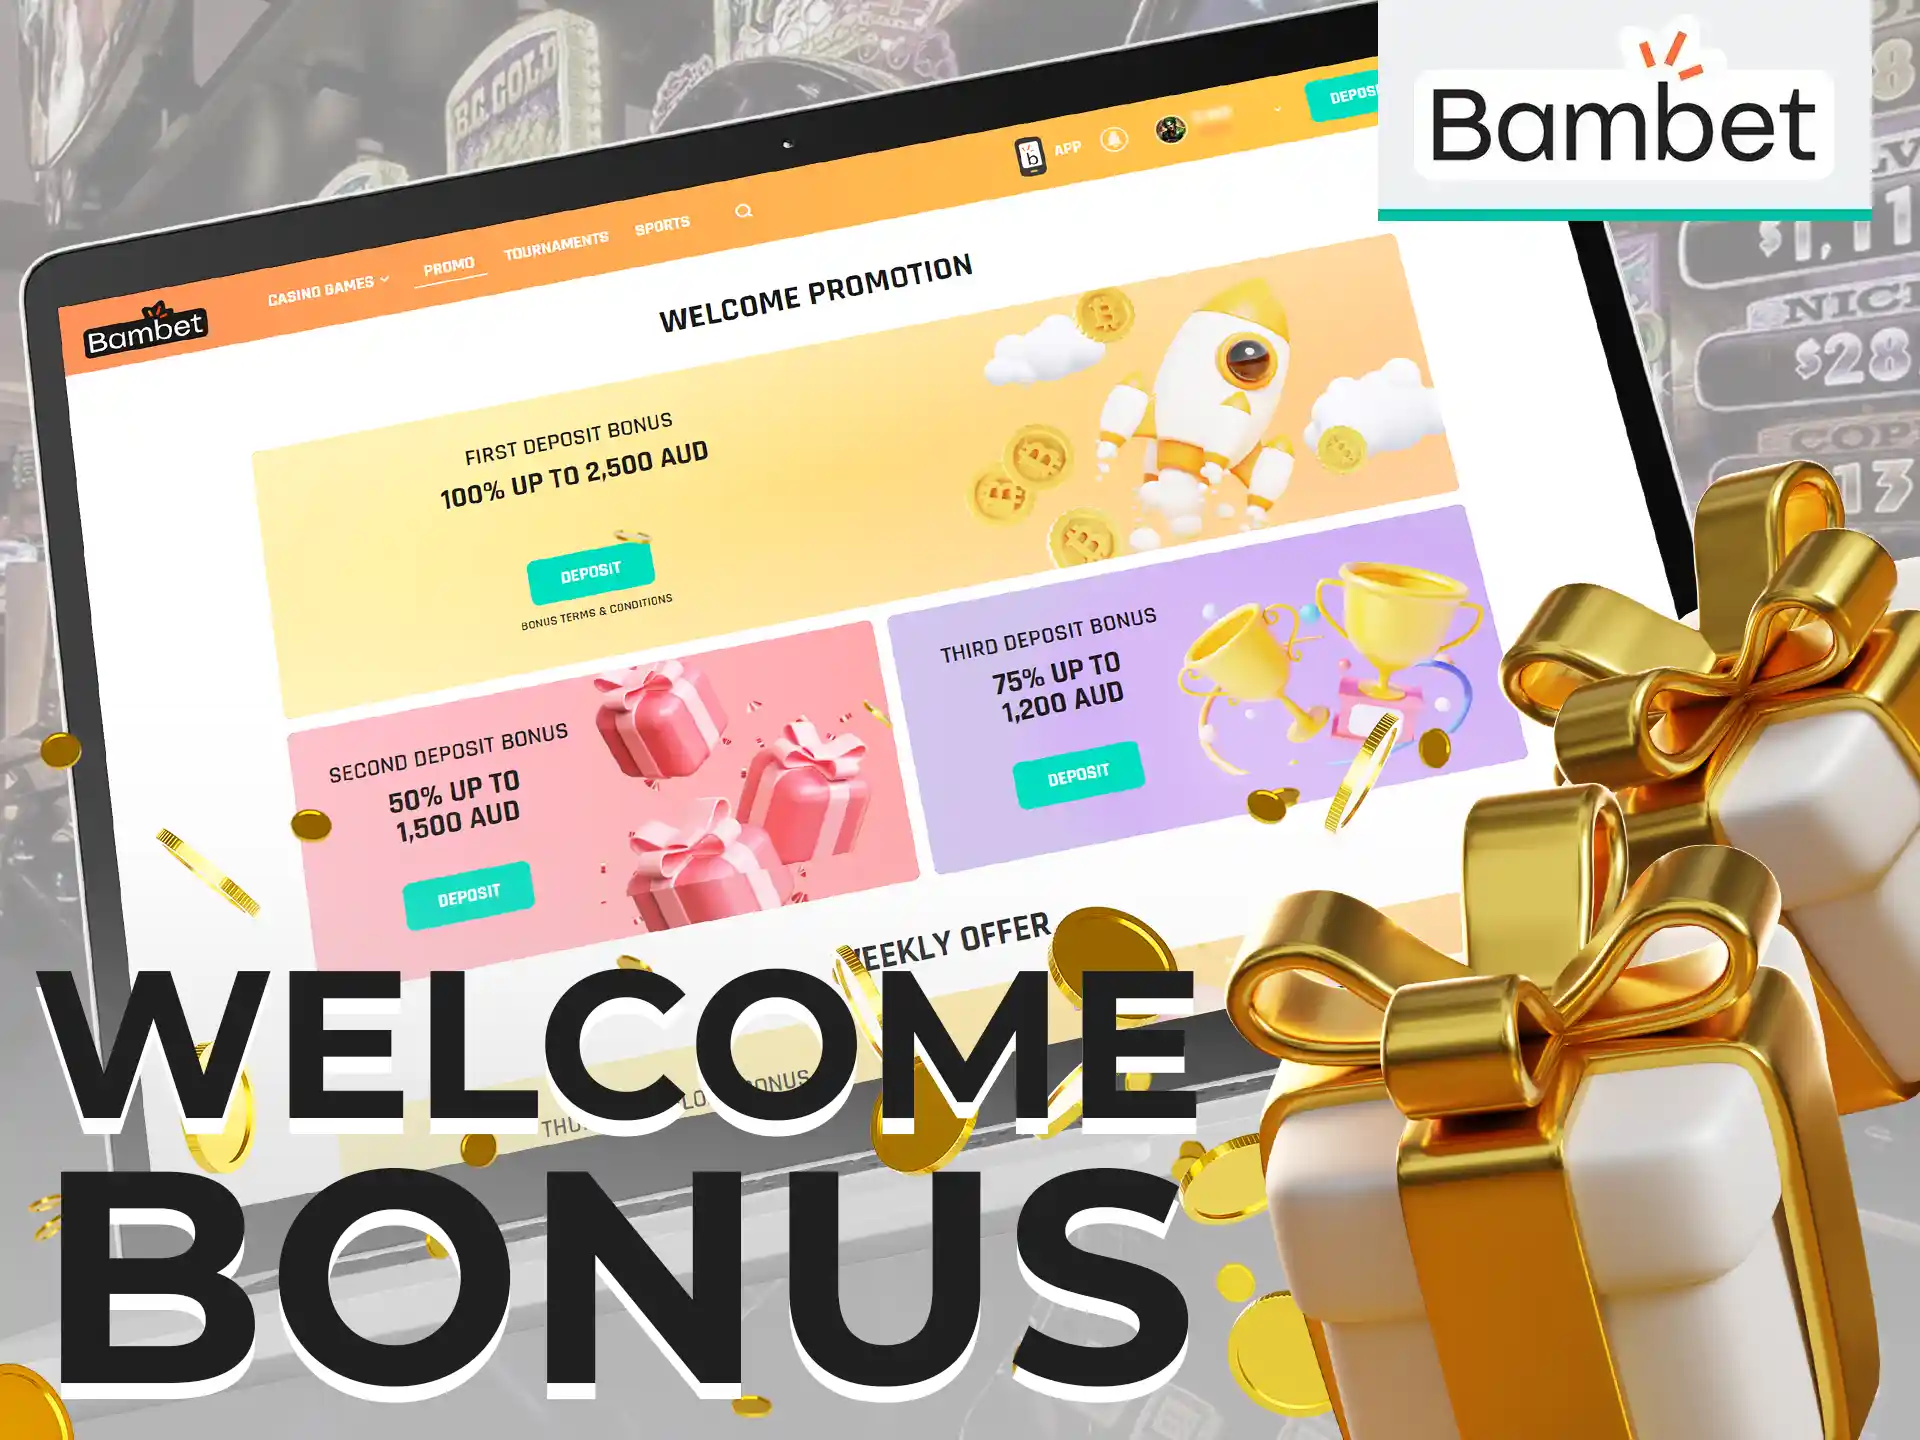 Bambet Casino gives a generous welcome package after registration.